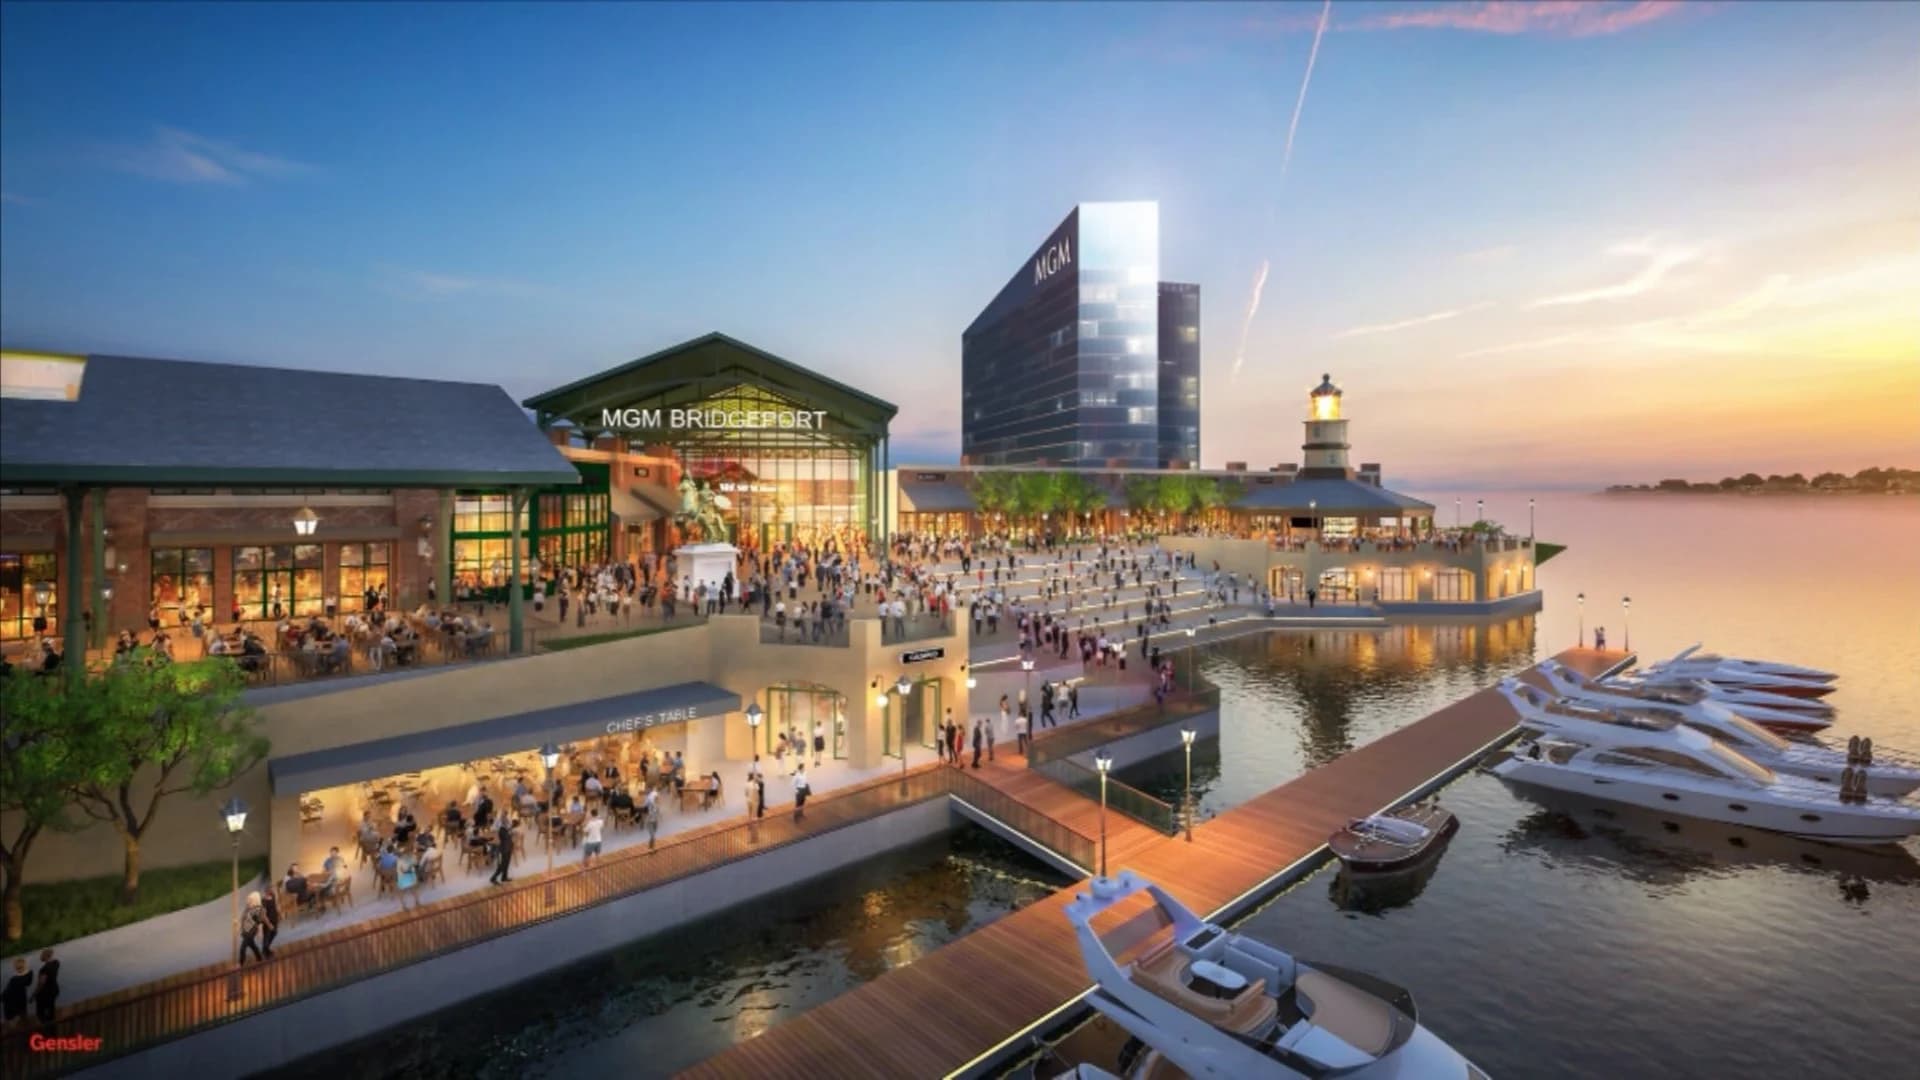 MGM announces plans to build new casino in Bridgeport